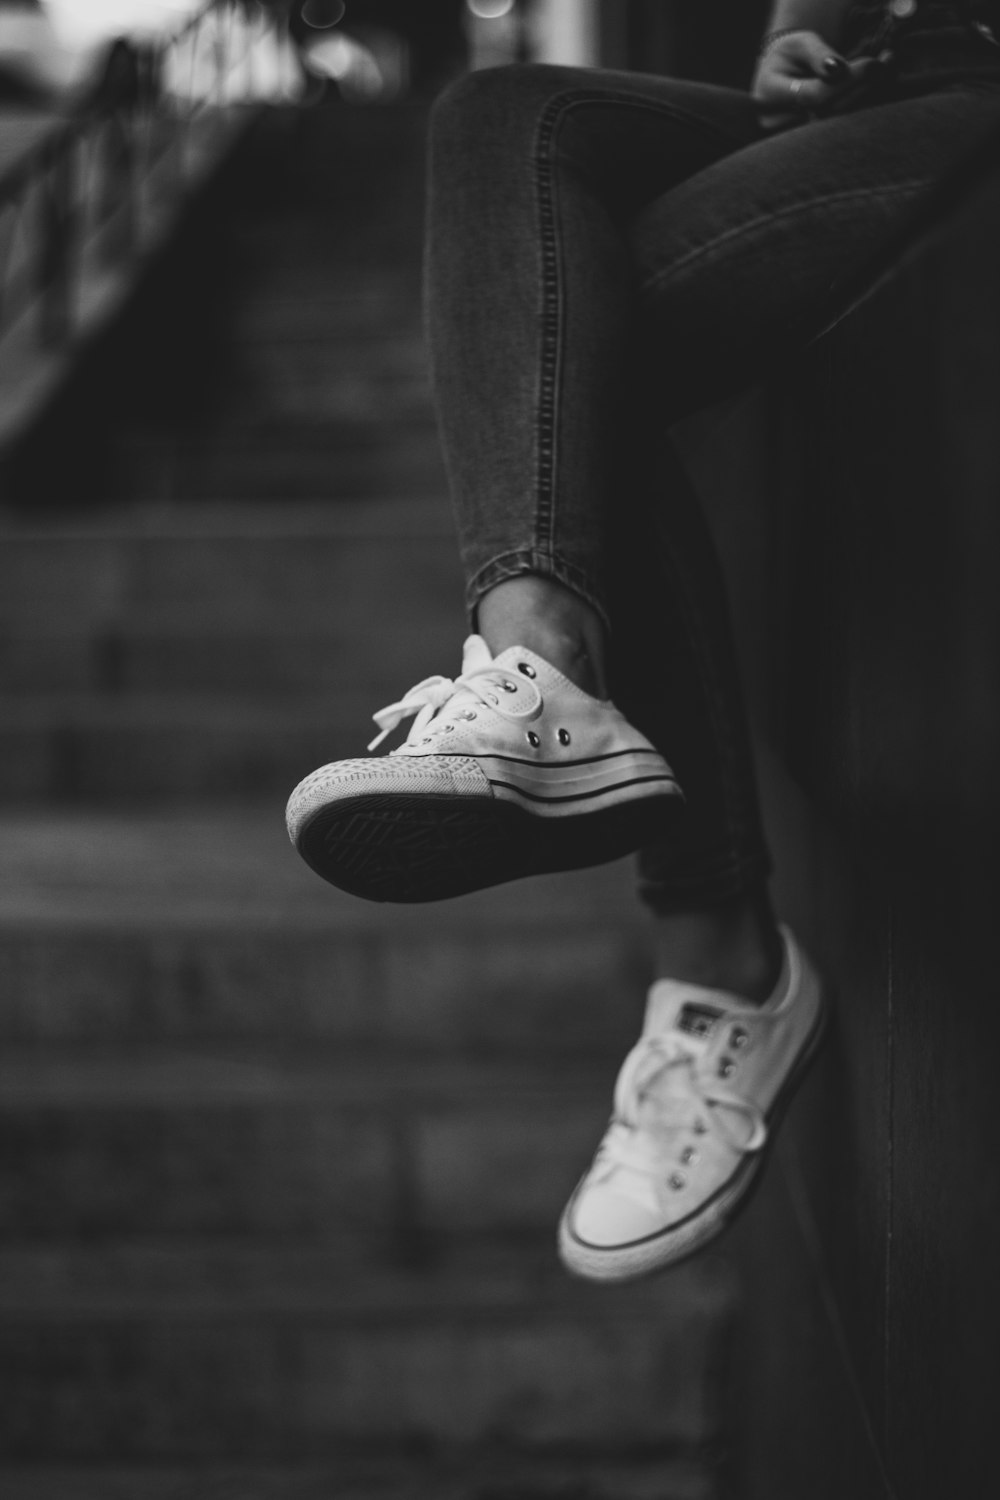 grayscale photography of person wearing jeans and sneakers